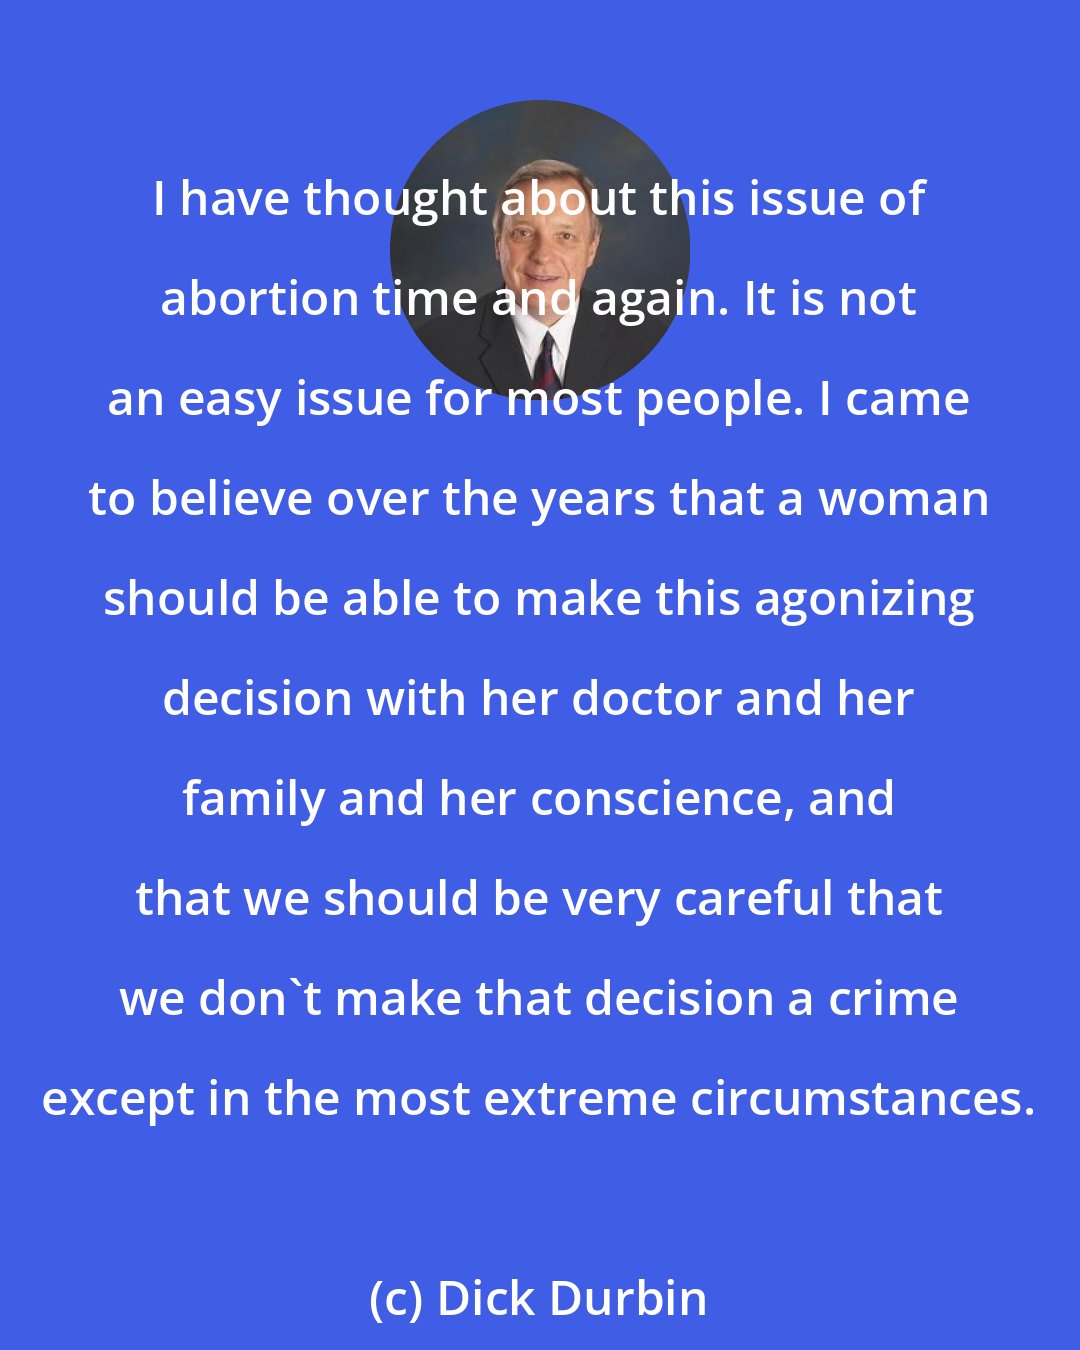 Dick Durbin: I have thought about this issue of abortion time and again. It is not an easy issue for most people. I came to believe over the years that a woman should be able to make this agonizing decision with her doctor and her family and her conscience, and that we should be very careful that we don't make that decision a crime except in the most extreme circumstances.